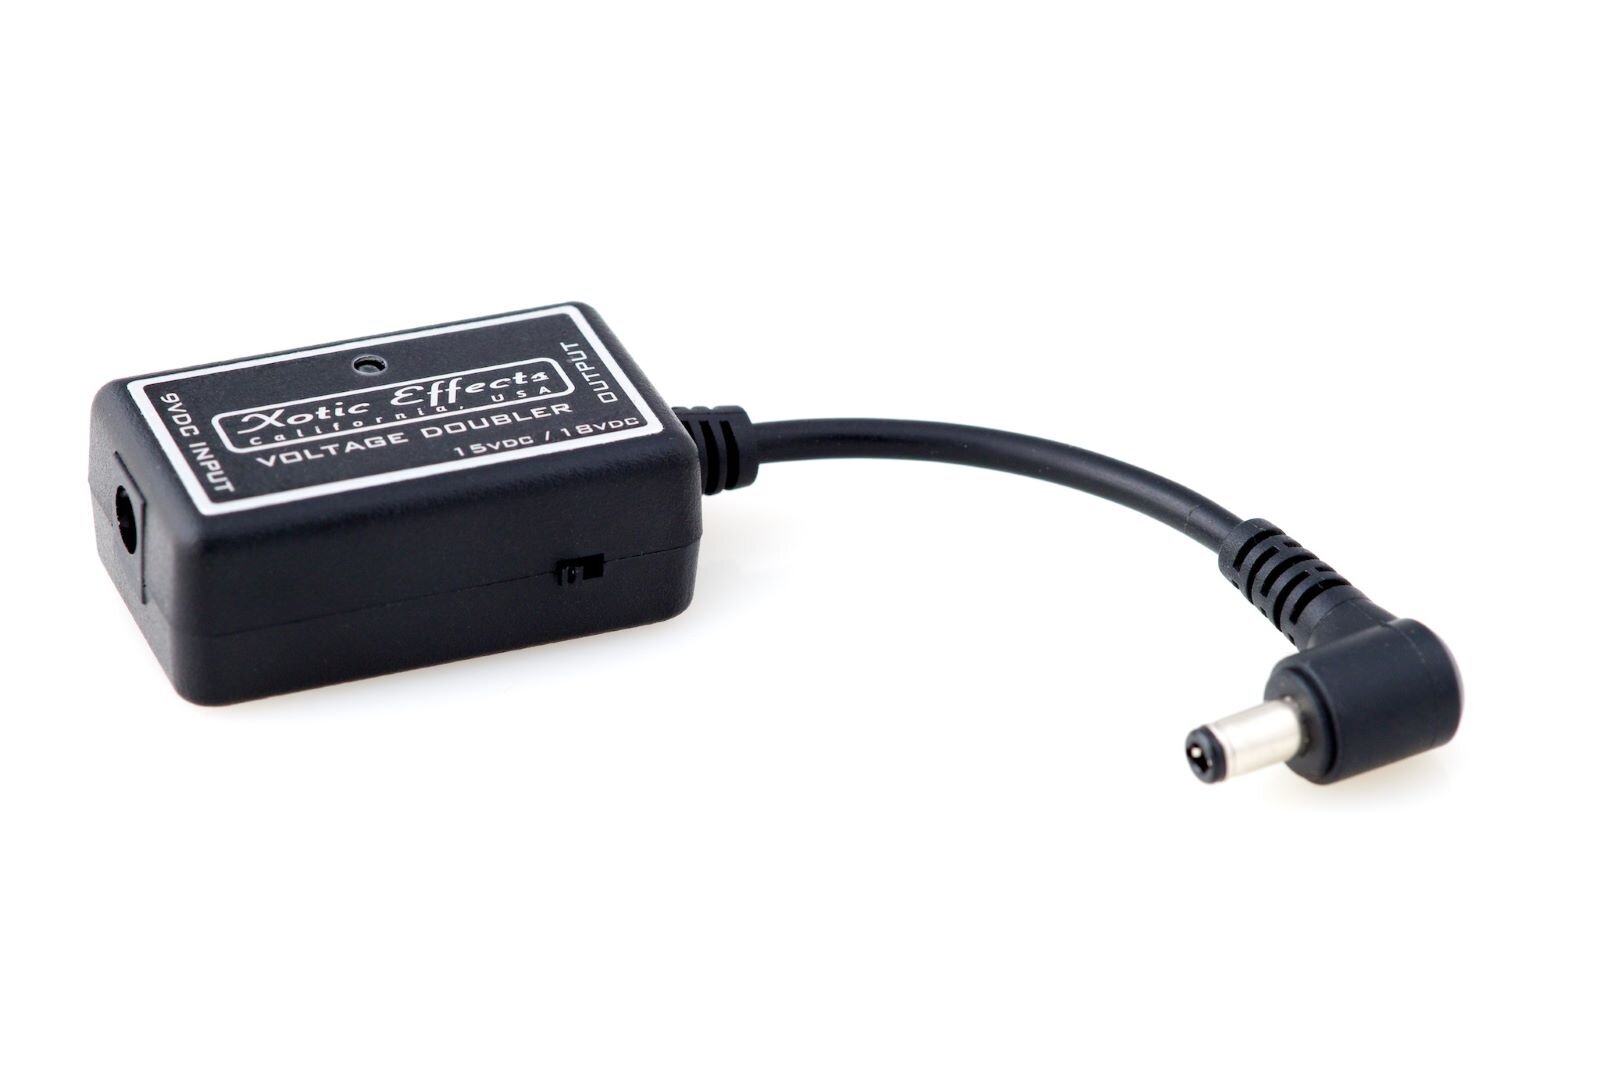 Xotic XVD-1 Voltage Doubler, 9 Volt up to 15 or 18 VDC : photo 1